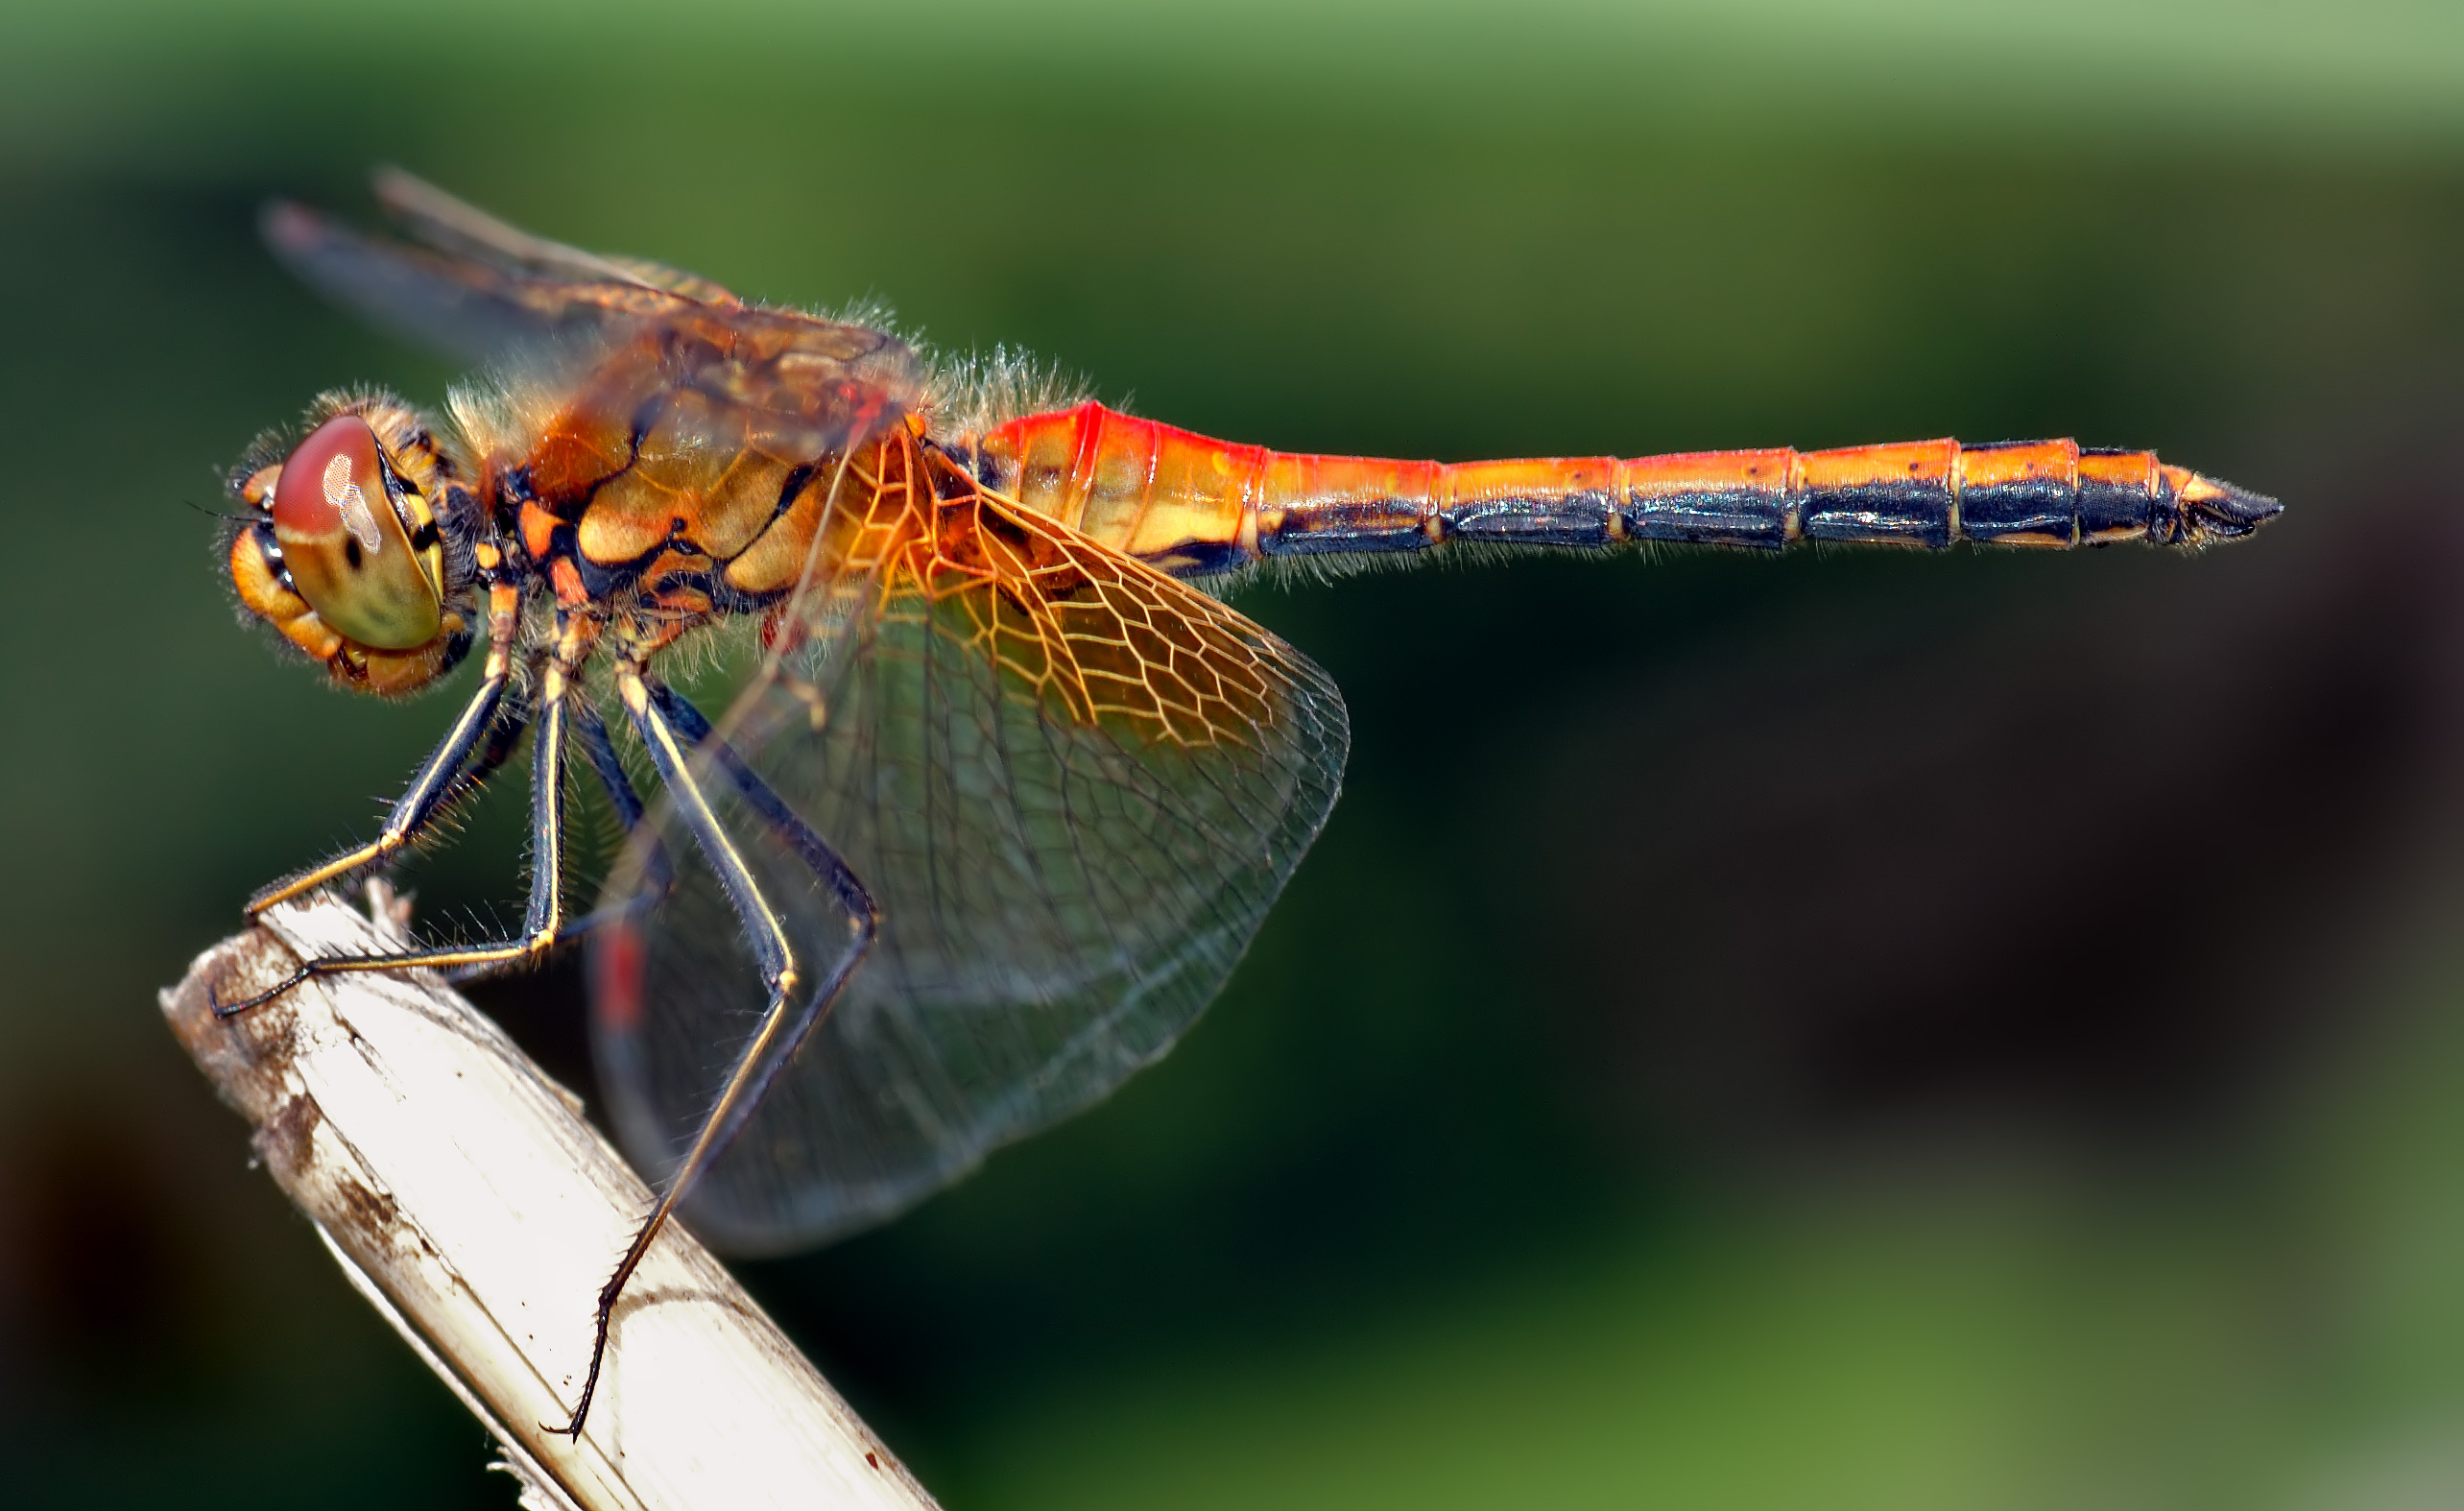 "Dragonflies have a 95% hunt success rate. Making them the most effective hunters in the world."